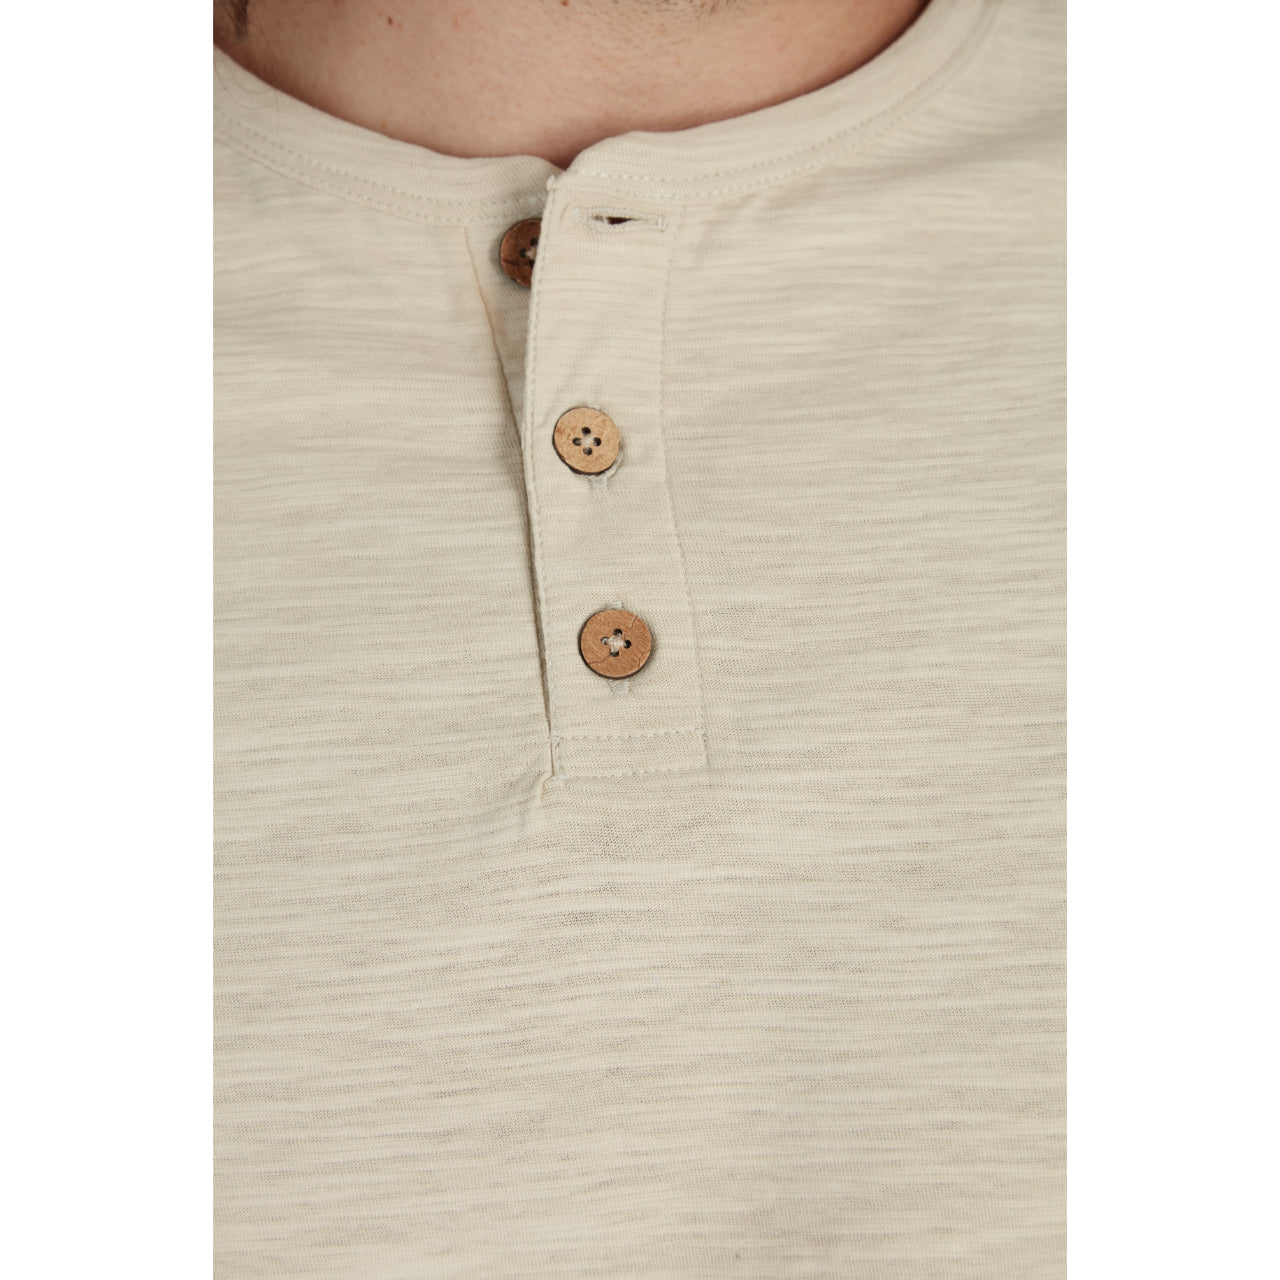 Plain Short Sleeve Sand Colored Henley for Men buttons close up of neck